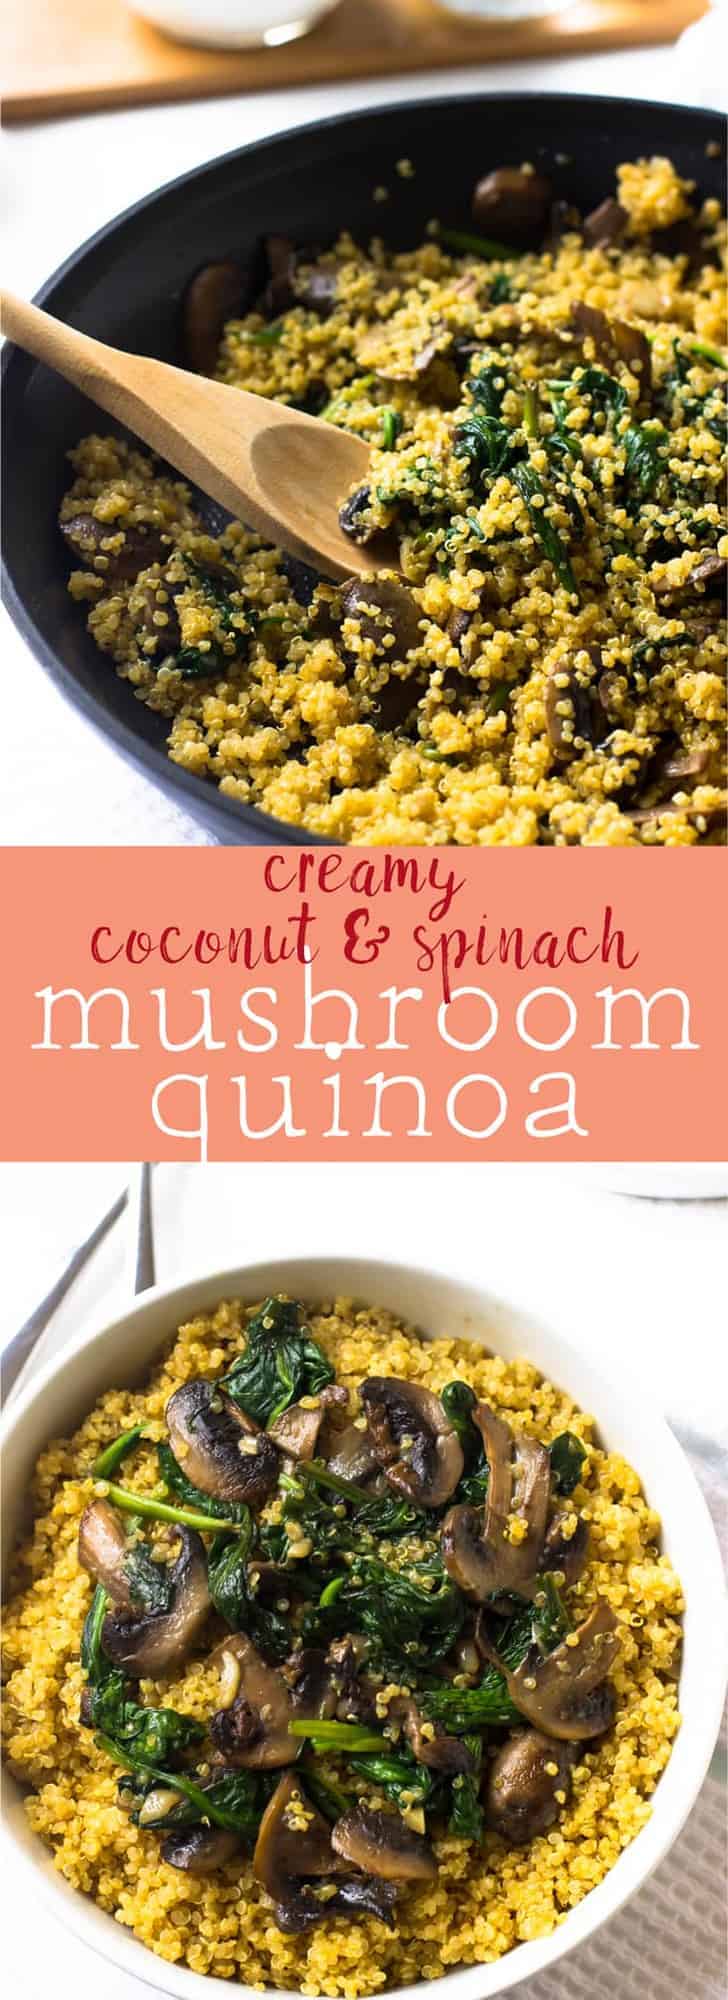 This Creamy Coconut Spinach and Mushroom Quinoa is a delicious 30 minute dish that has 7 servings of vegetables! via https://jessicainthekitchen.com